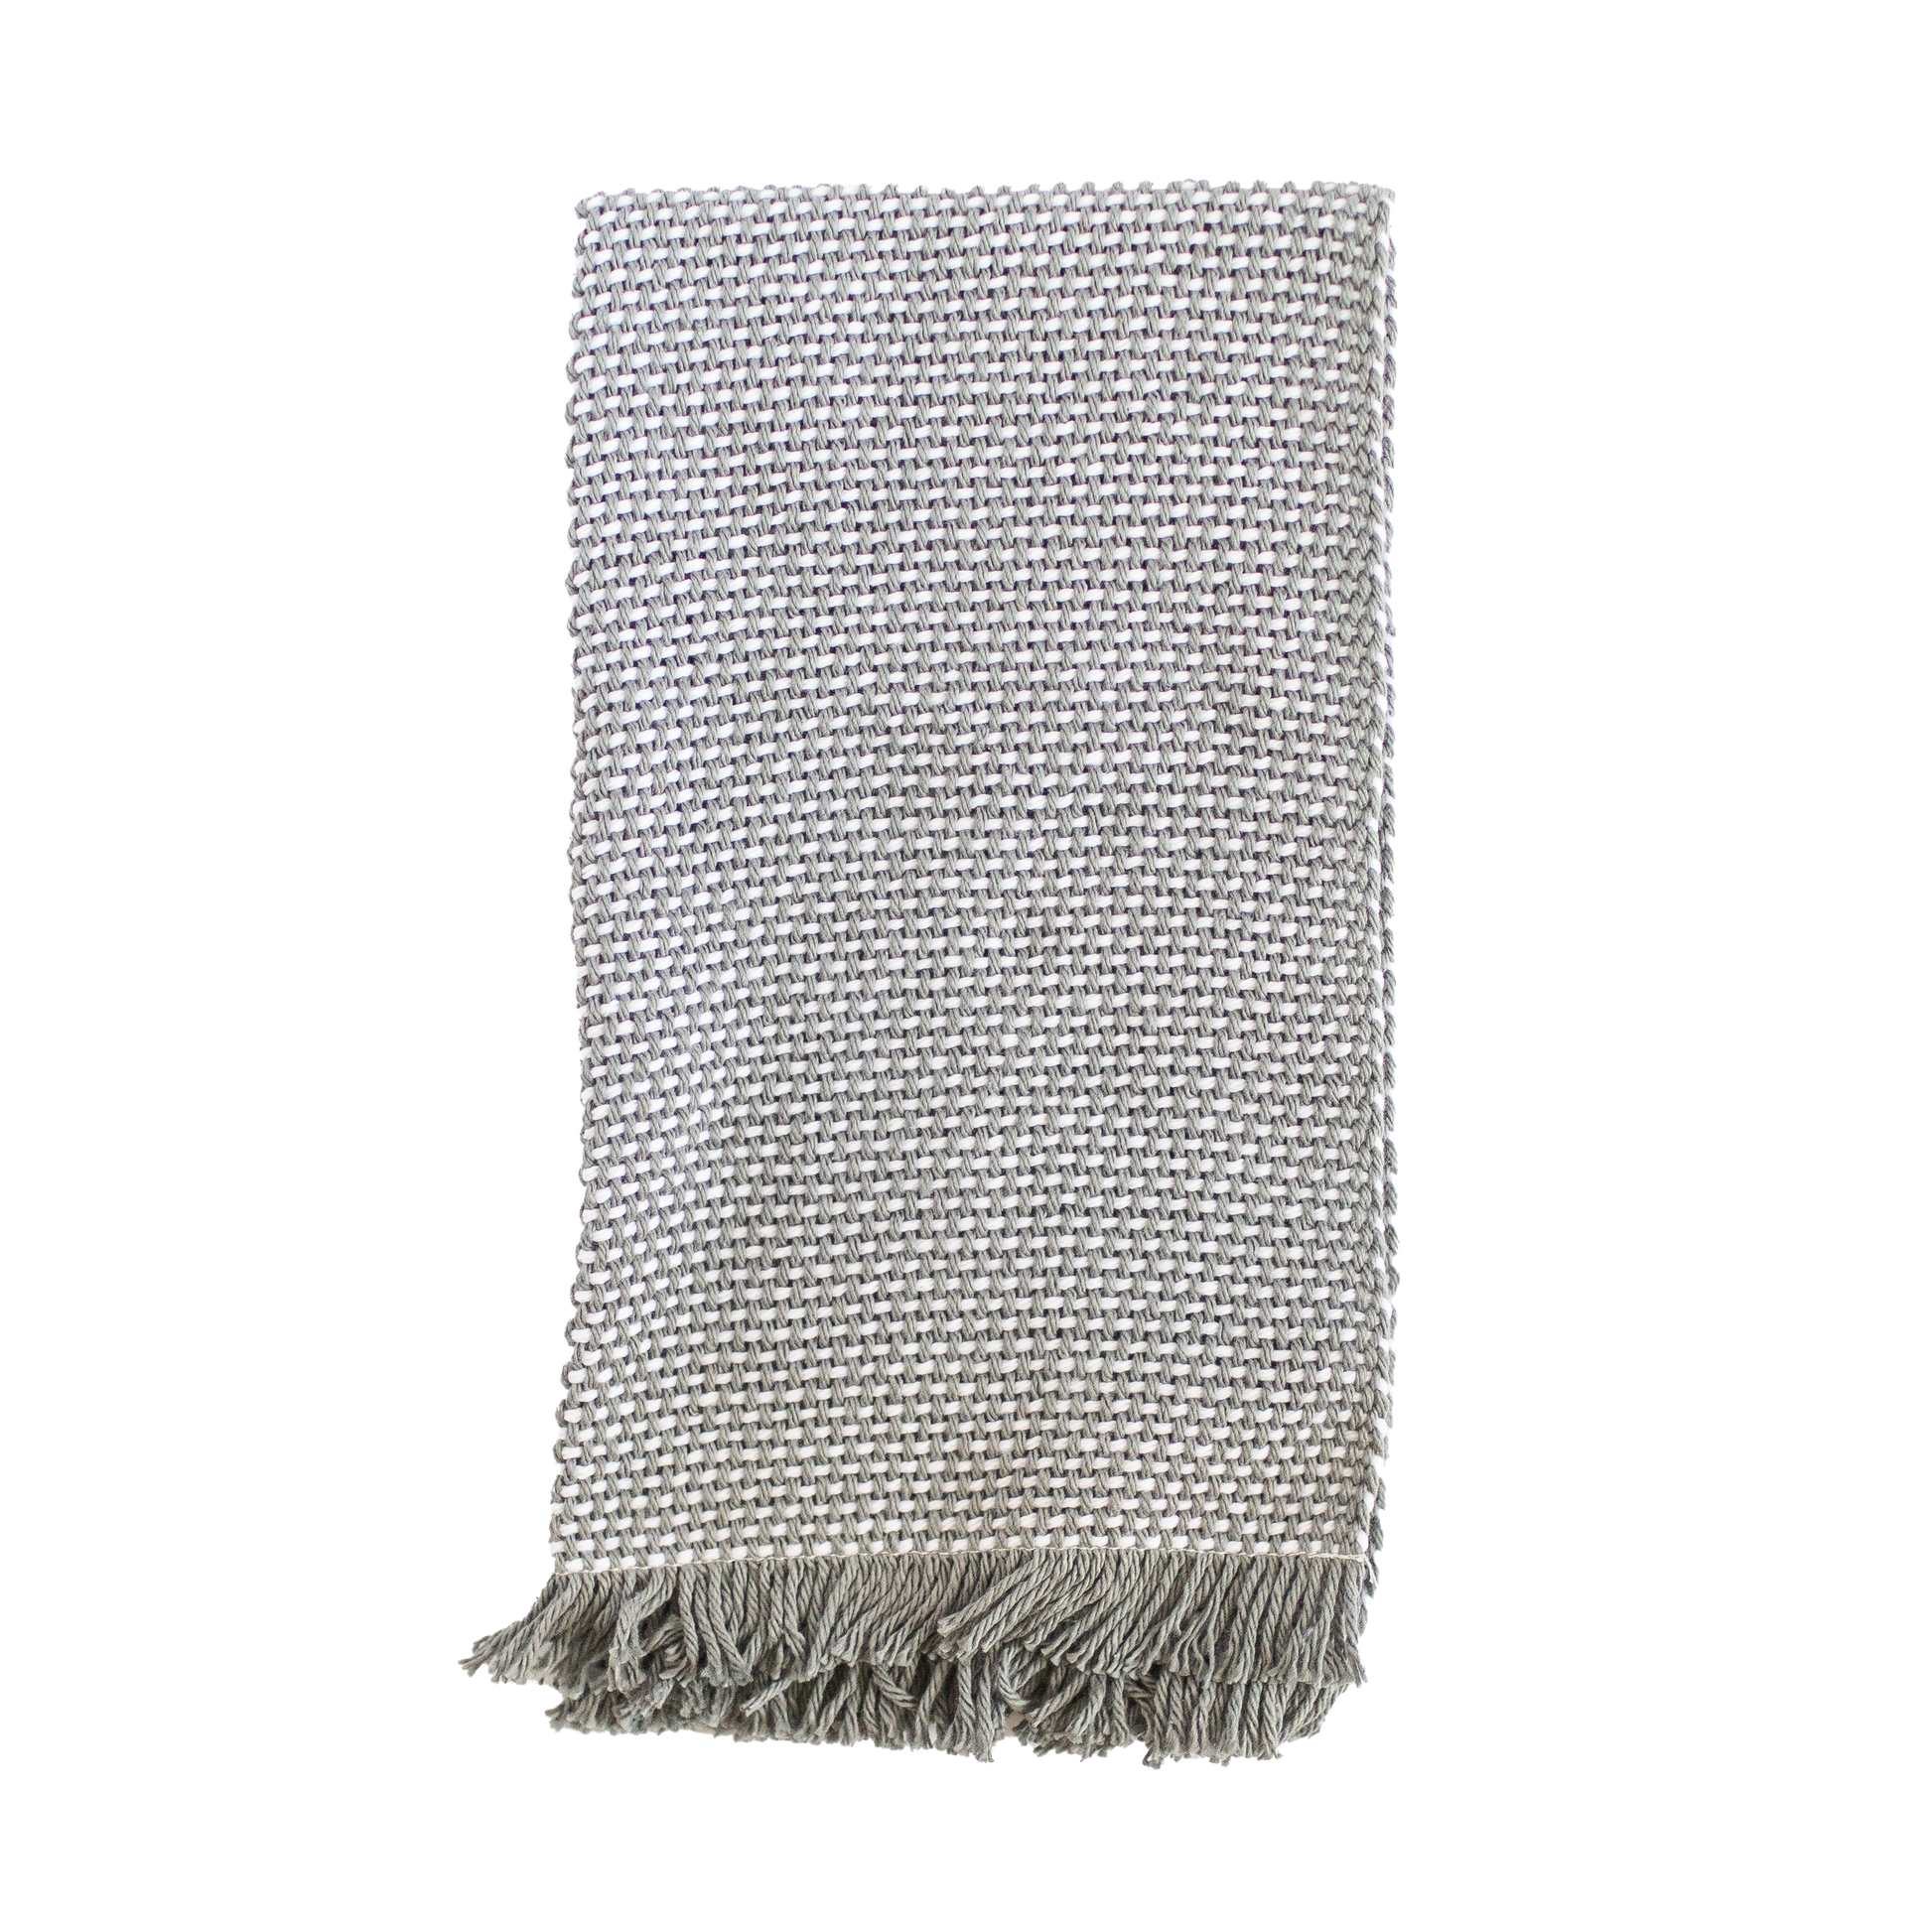 Folded gray and white hand towel